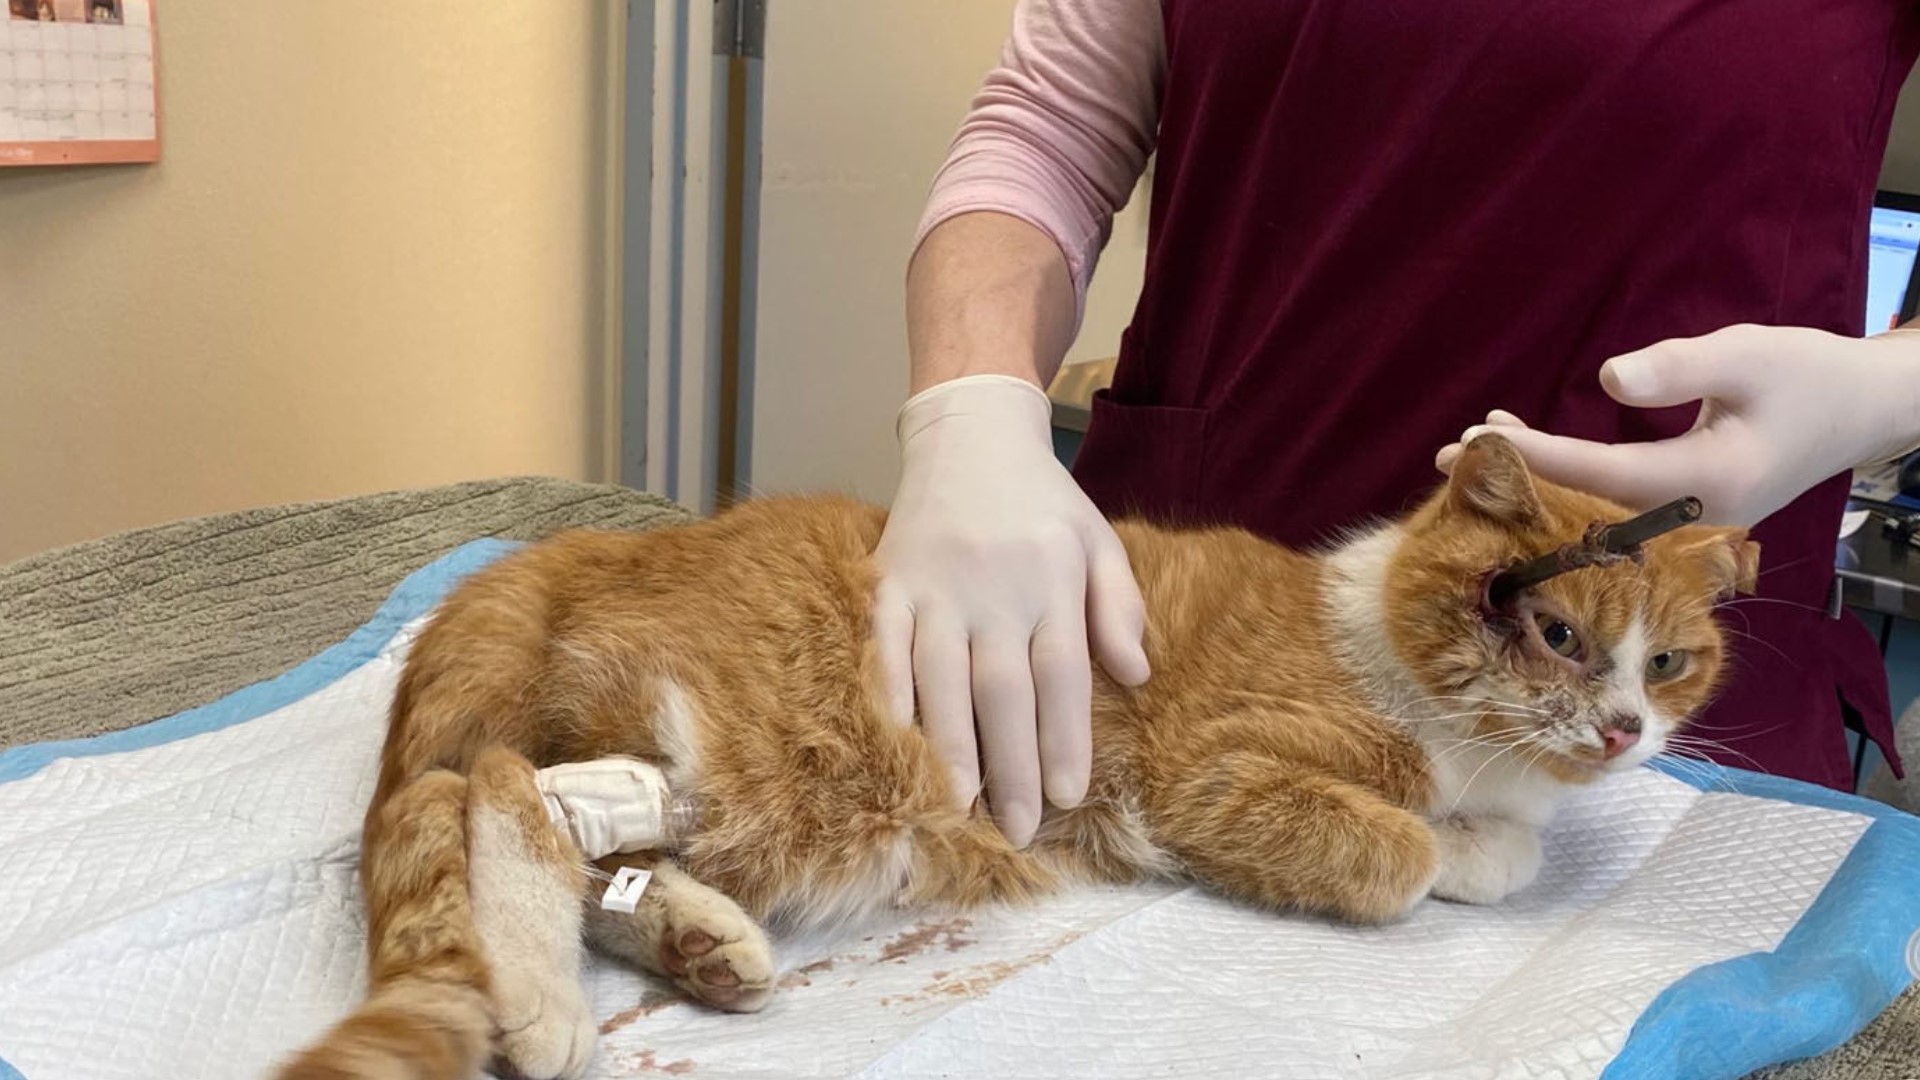 Cupid the cat came into the shelter with a five-inch arrow impaled in its head Valentine's Day. The public came to help.